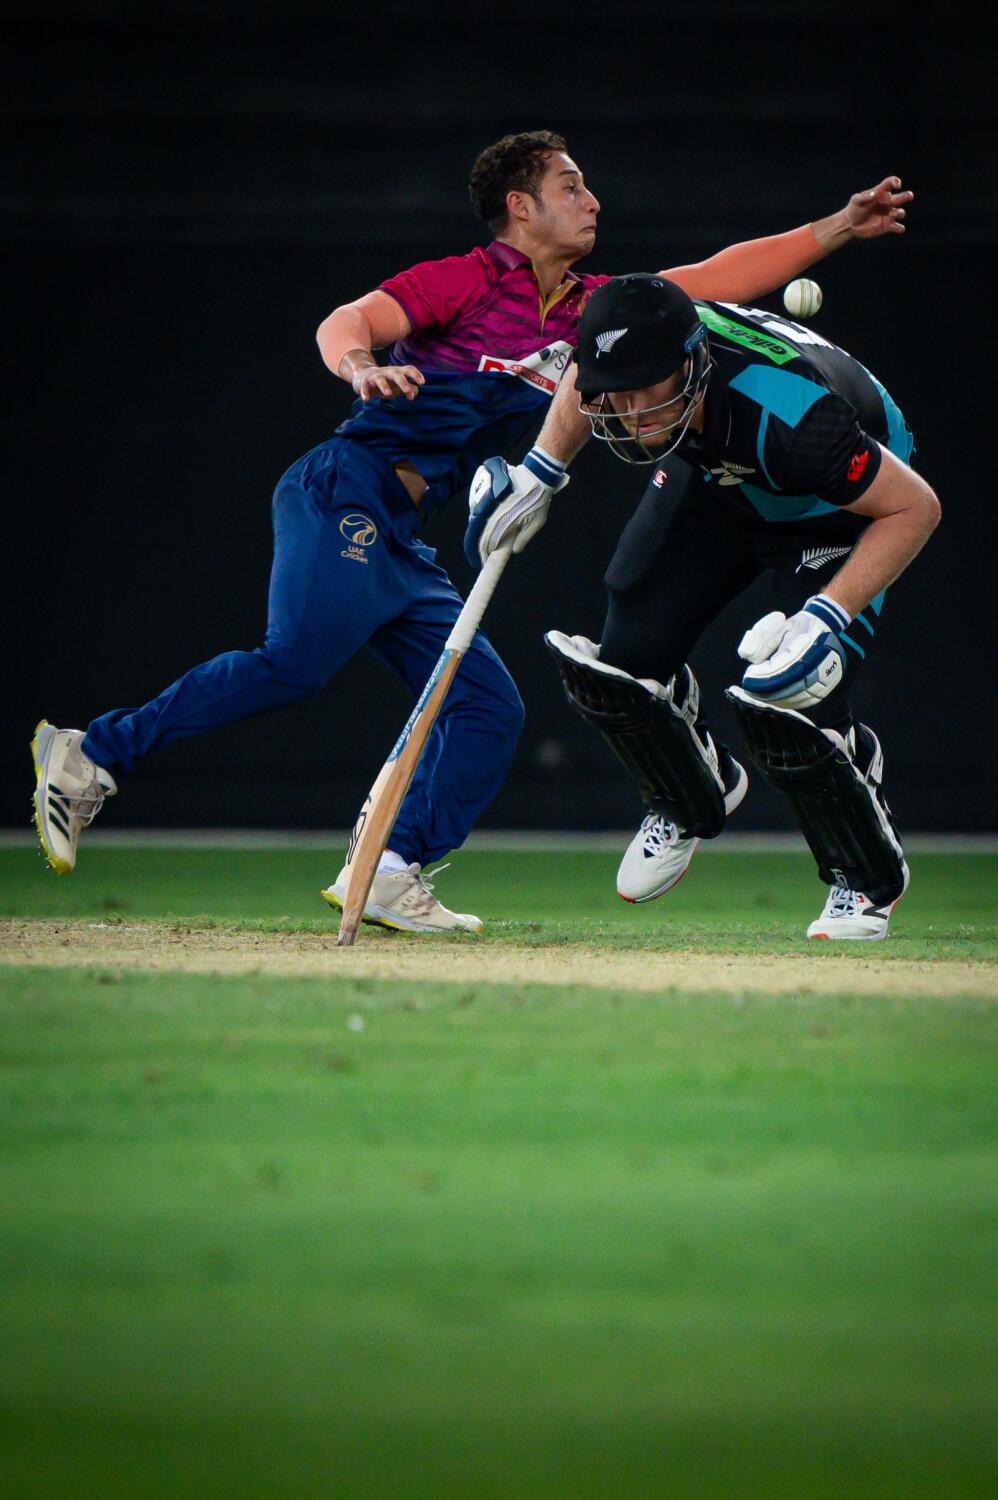 UAE's Mohammed Faraazuddin leaps to stop a ball while playing against New Zealand during the secon T20I match at Dubai International Stadium on Saturday.